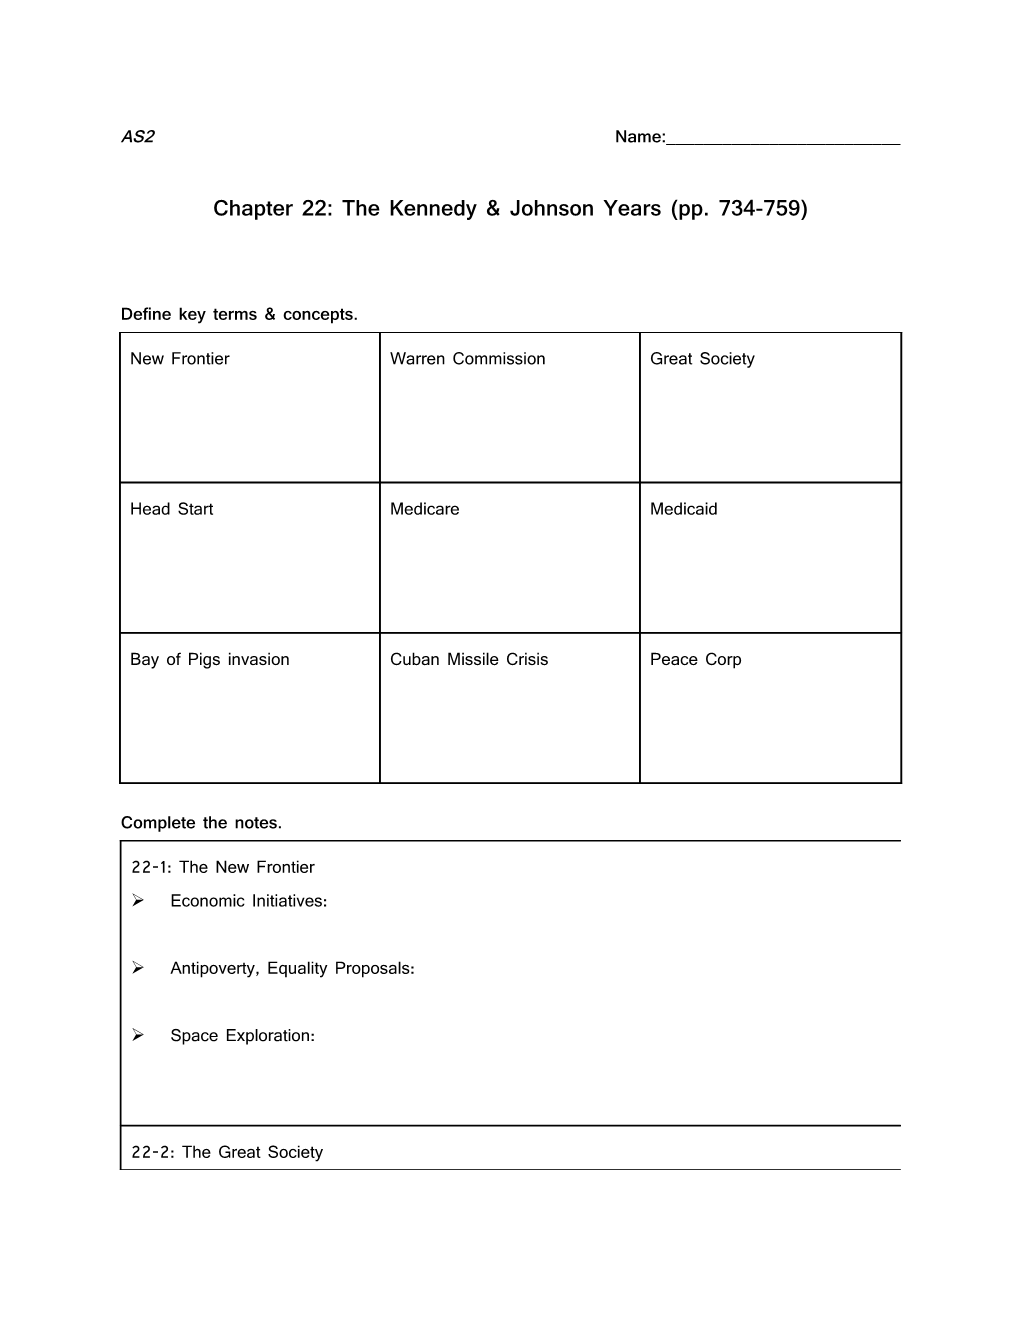 Chapter 22: the Kennedy & Johnson Years (Pp. 734-759)